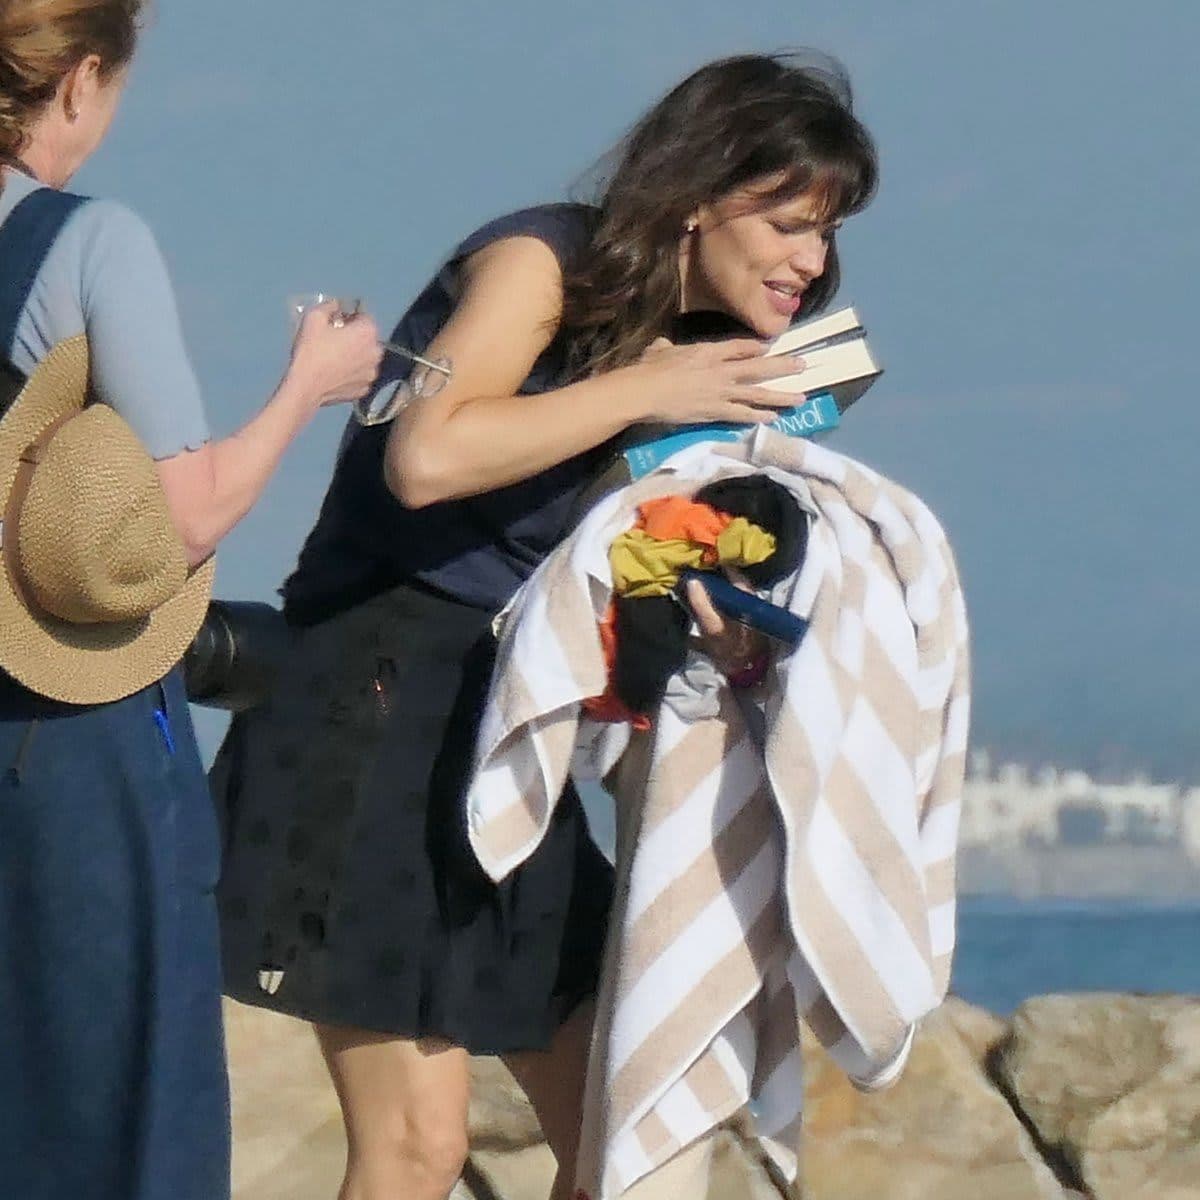 Jennifer Garner creates memories with her kids in a fun family photo shoot at the beach